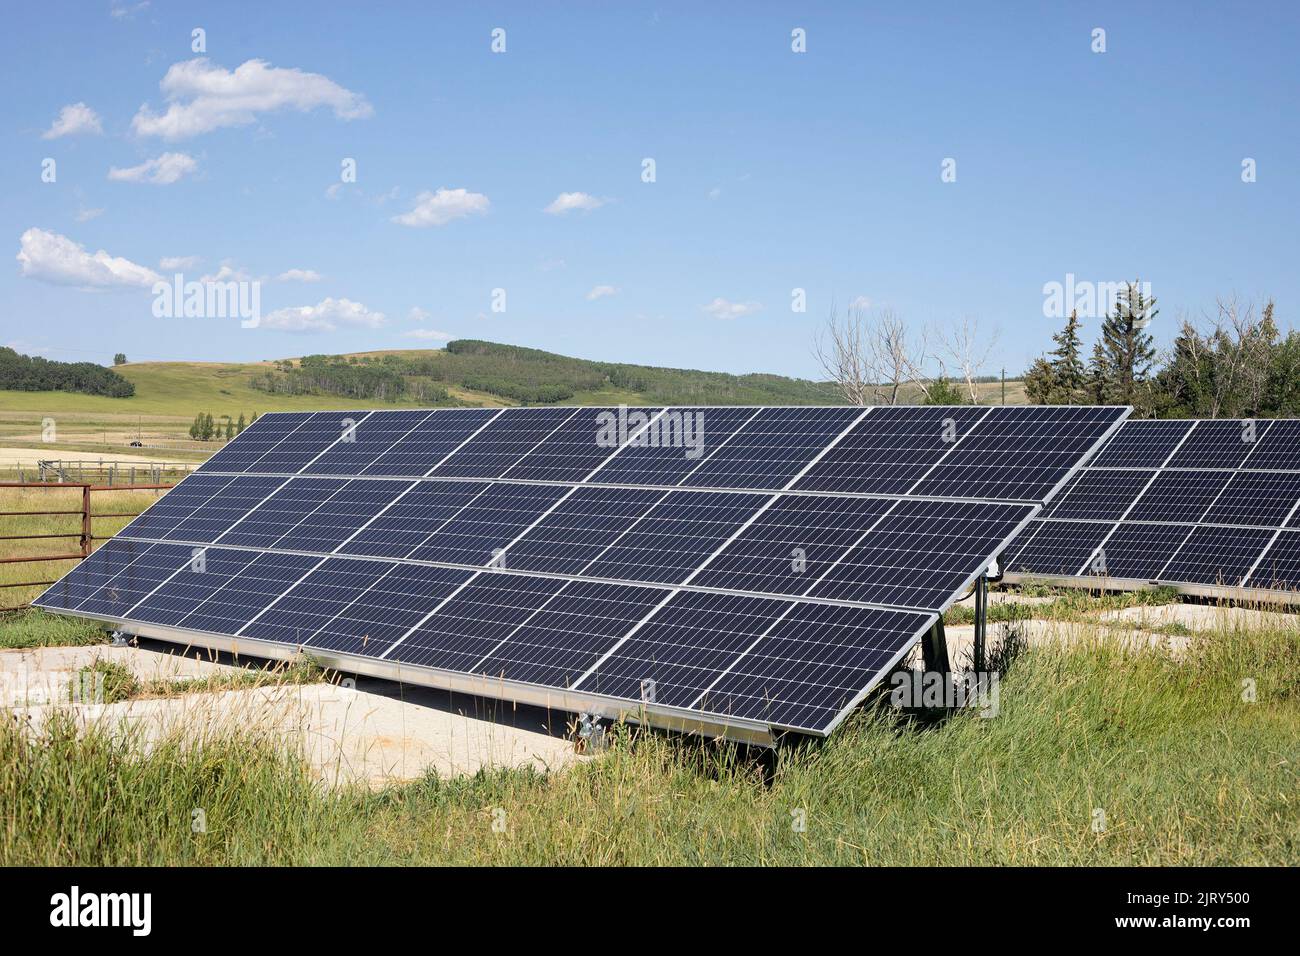 Solar panels on a sunny day. The solar photovoltaic array provides renewable energy for a permaculture farm in rural Alberta, Canada Stock Photo